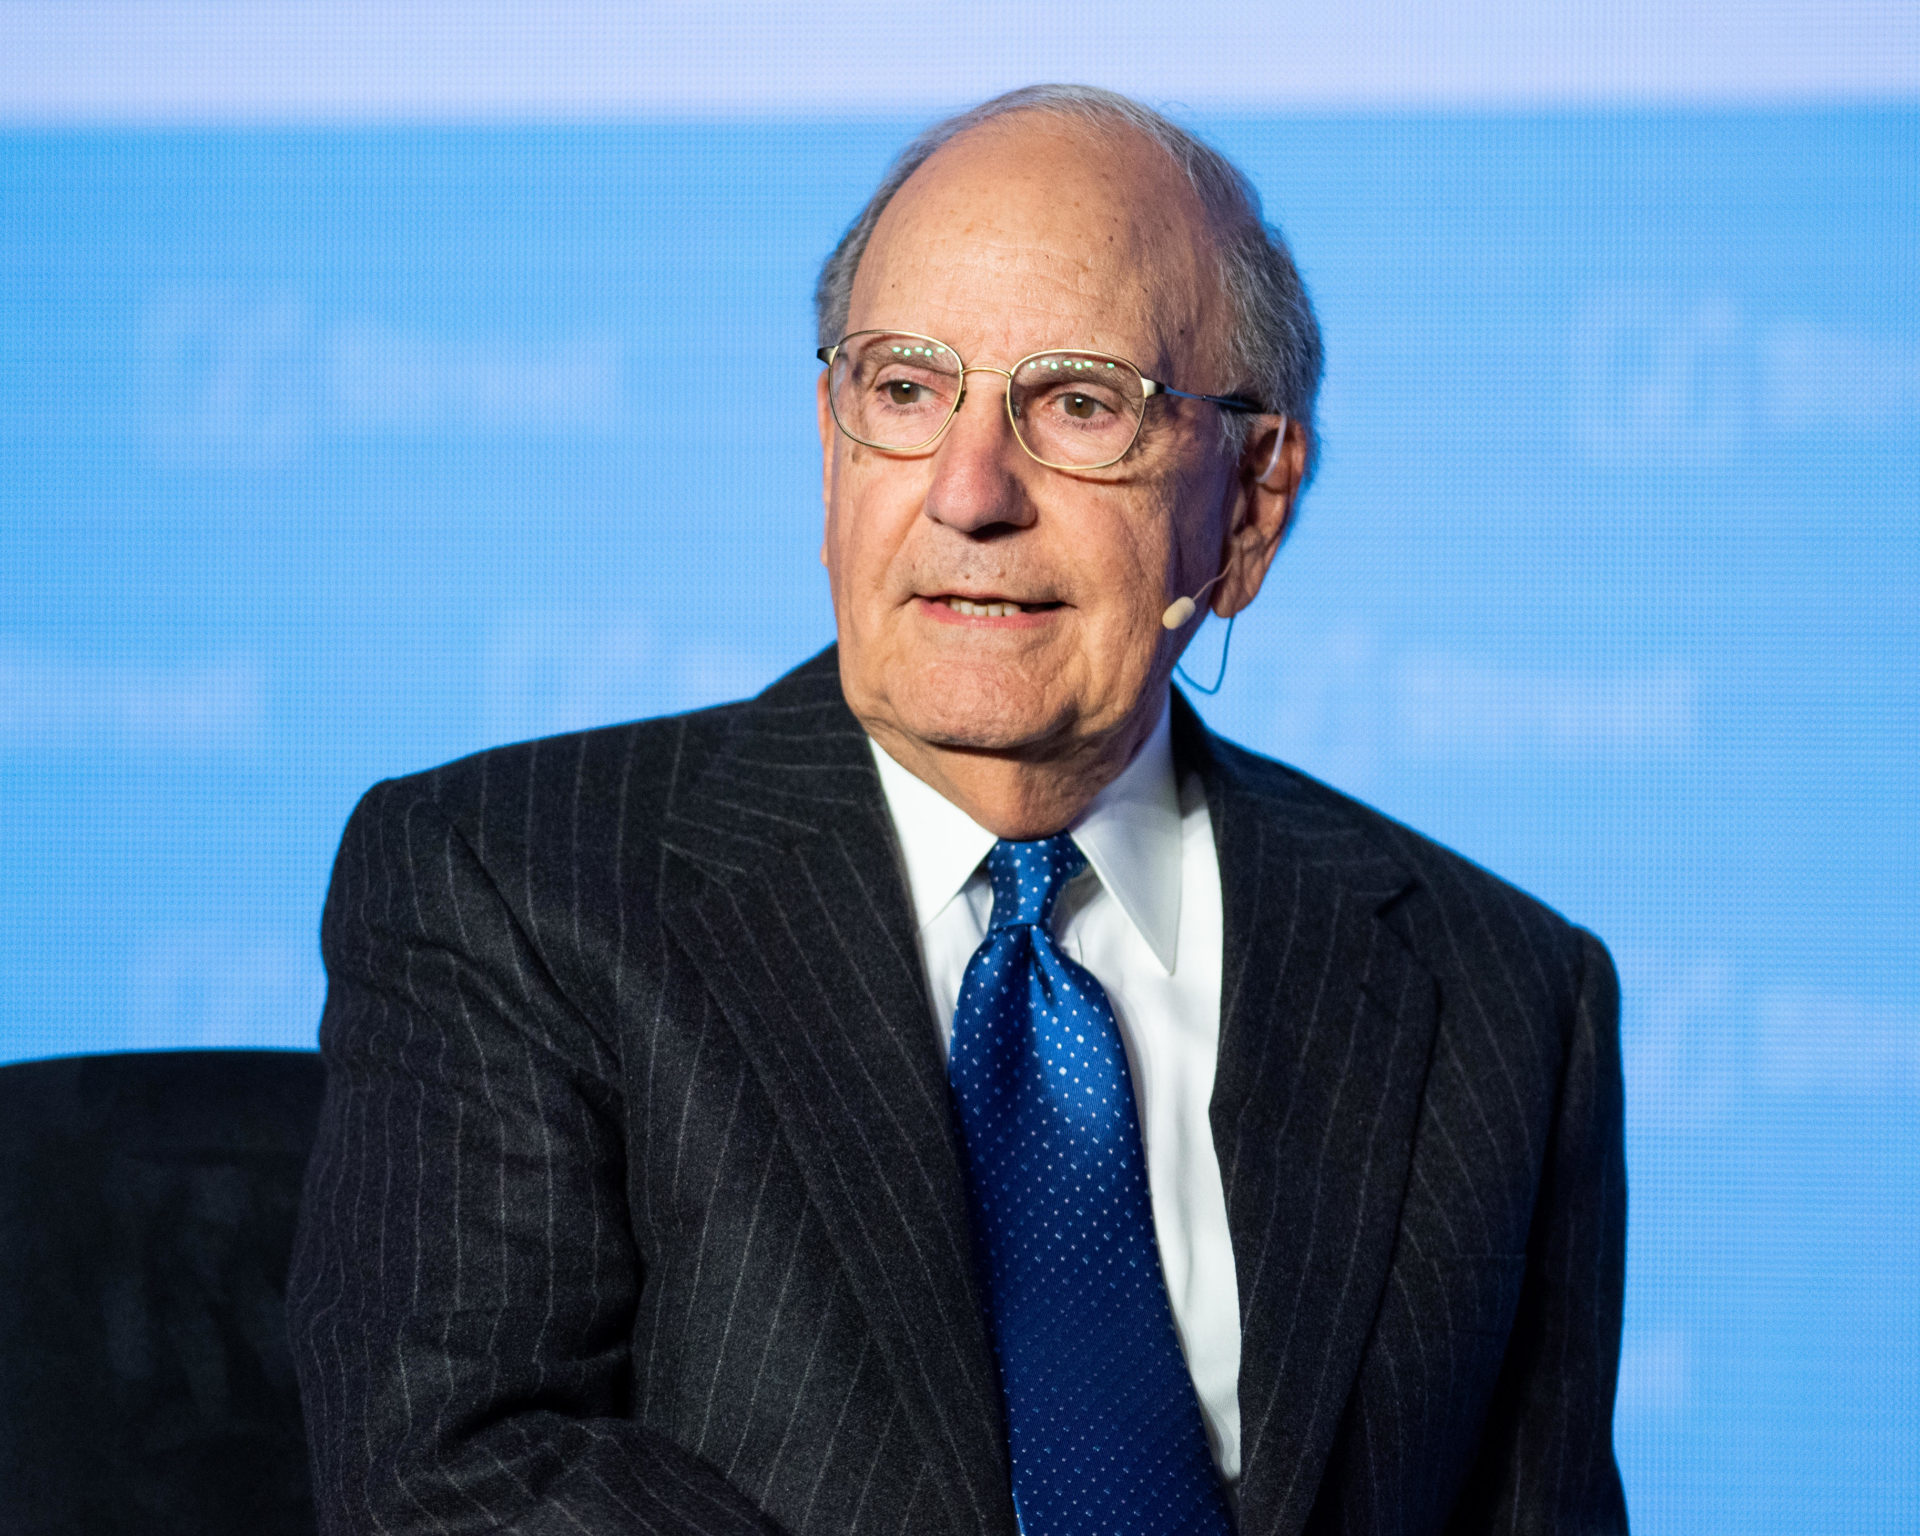 George Mitchell speaking in April 2018.